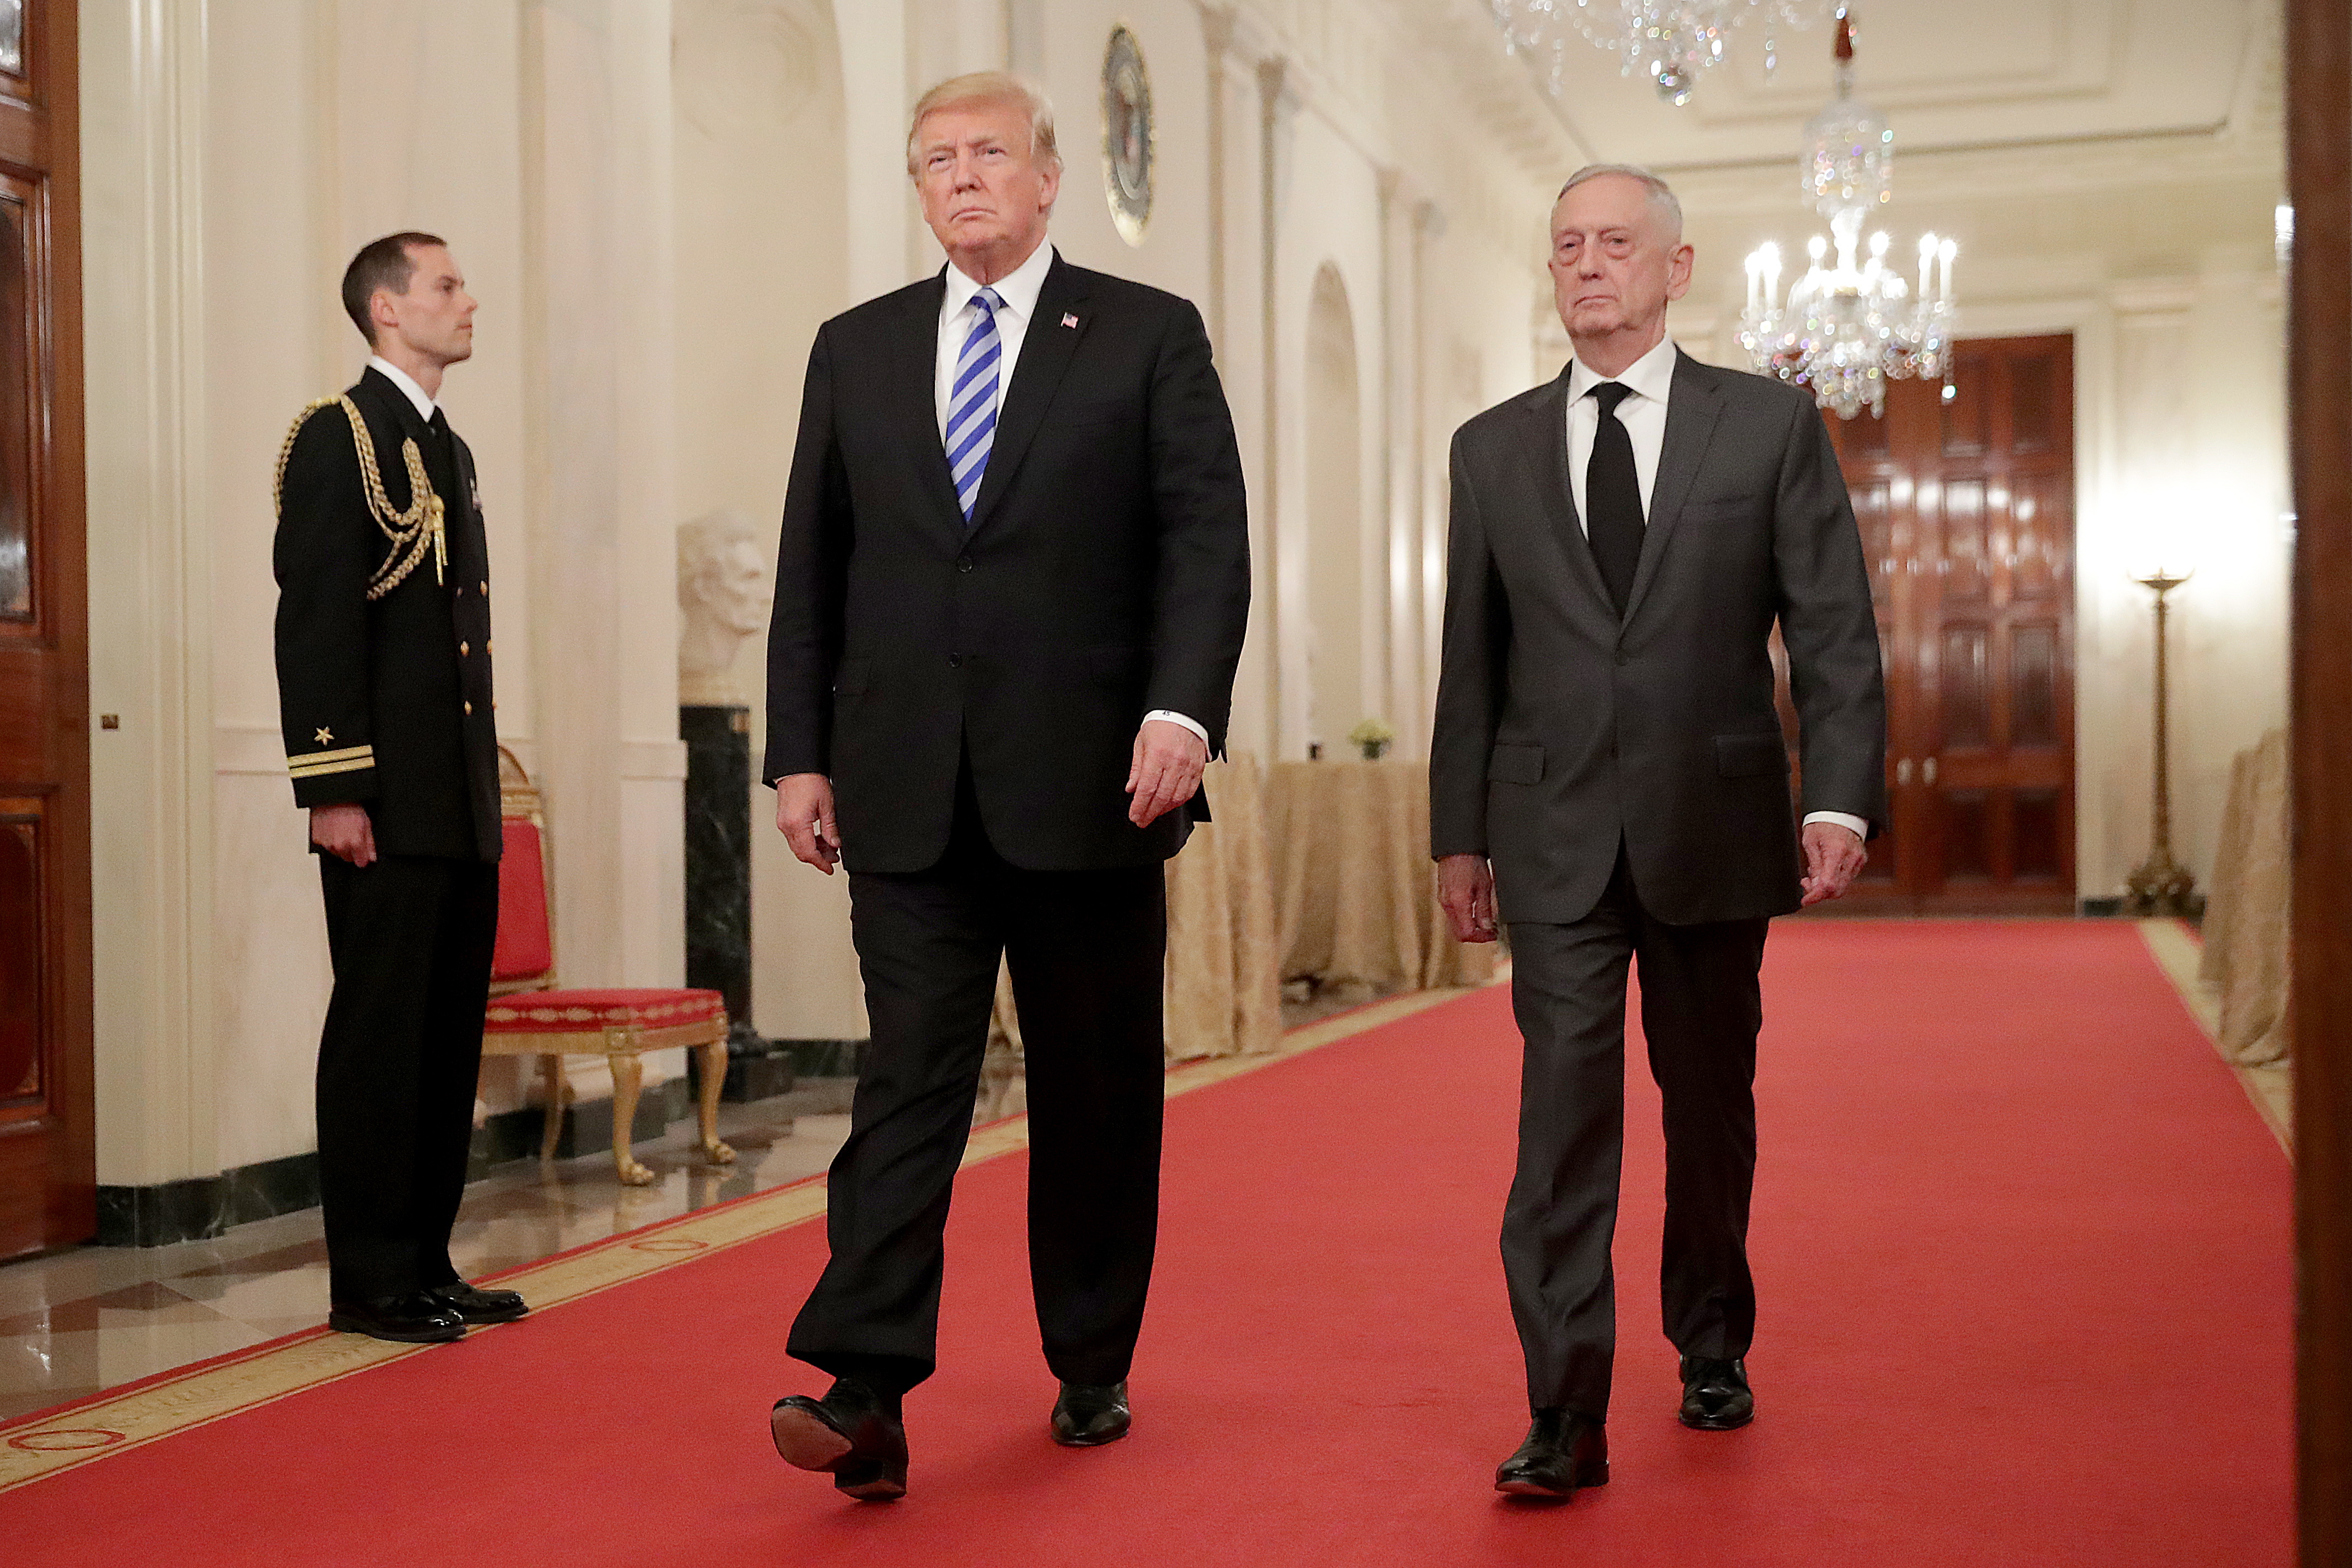 epa07120422 US President Donald J. Trump (L) and Defense Secretary James Mattis (R) arrive for an event commemorating the 35th anniversary of attack on the Beirut Barracks in the East Room of the White House in Washington, DC, USA, 25 October 2018. On 23 October 1983, two truck bombs struck the buildings housing Multinational Force in Lebanon (MNF) peacekeepers, killing 241 US and 58 French peacekeepers and 6 civilians.  EPA/CHIP SOMODEVILLA / POOL